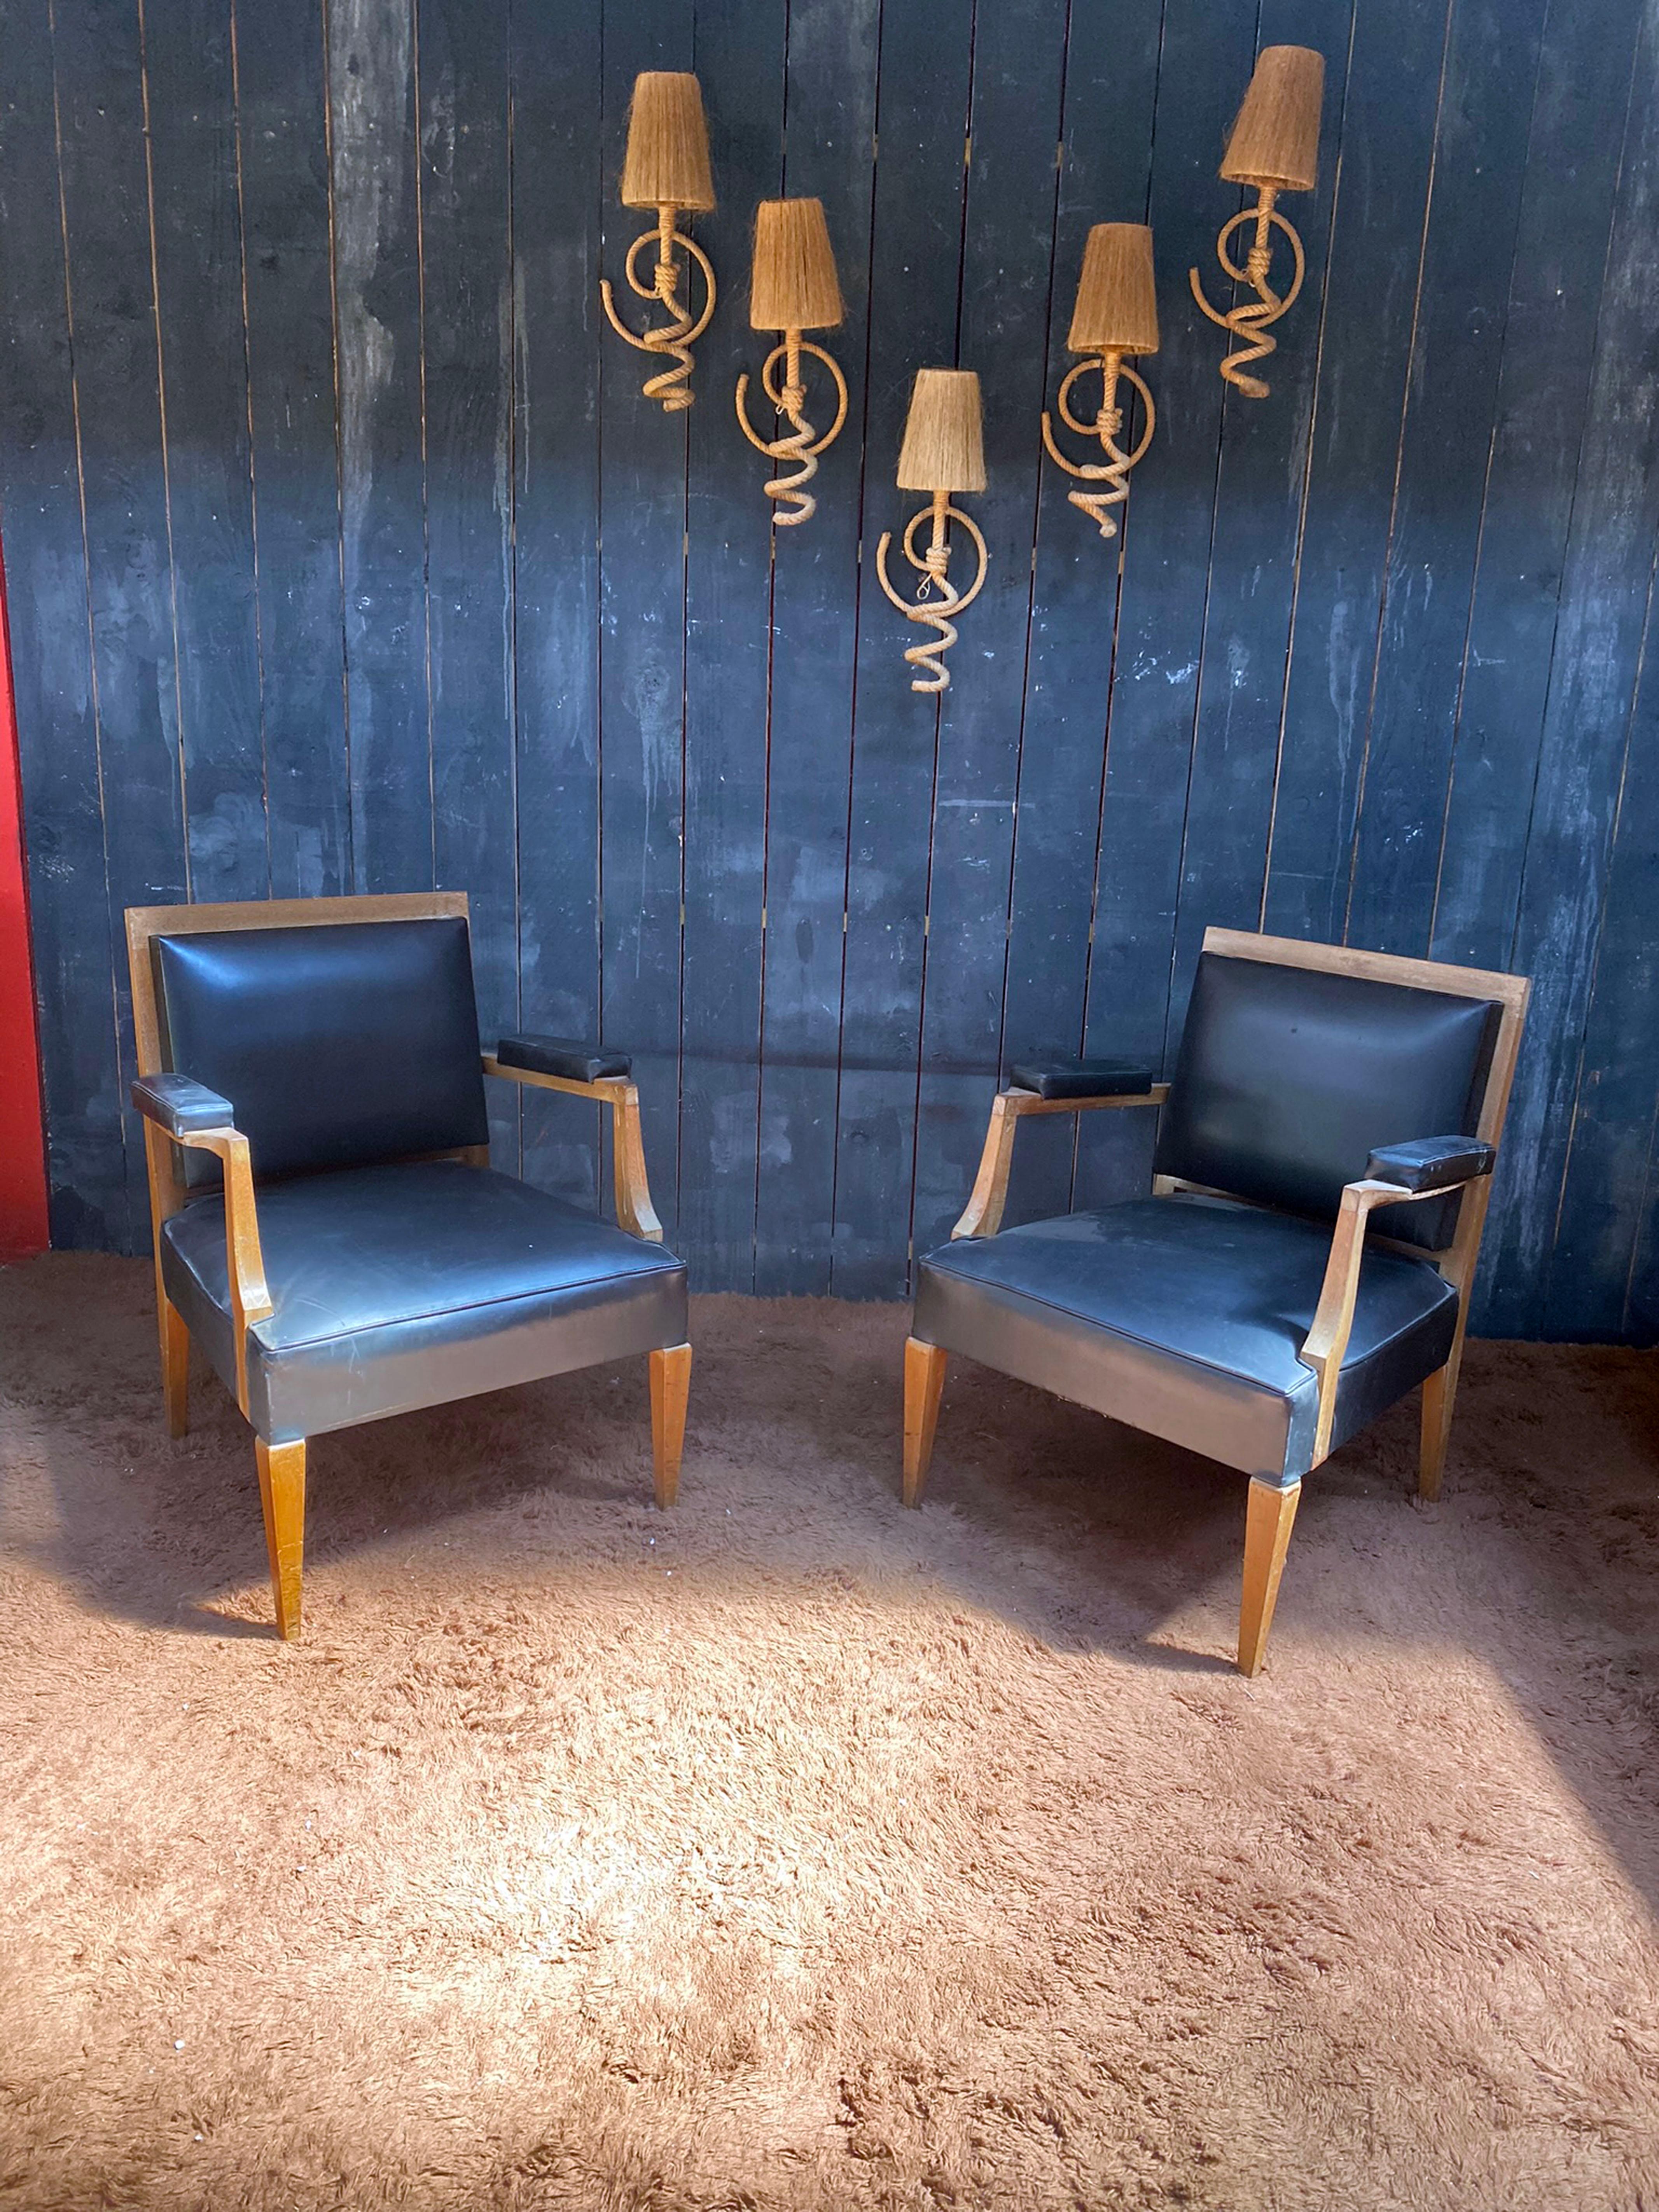 Pair of Art Deco armchairs in walnut in the style of
Andre Arbus
around 1940
patina to see again
faux leather in good condition
1 third armchair is also available.